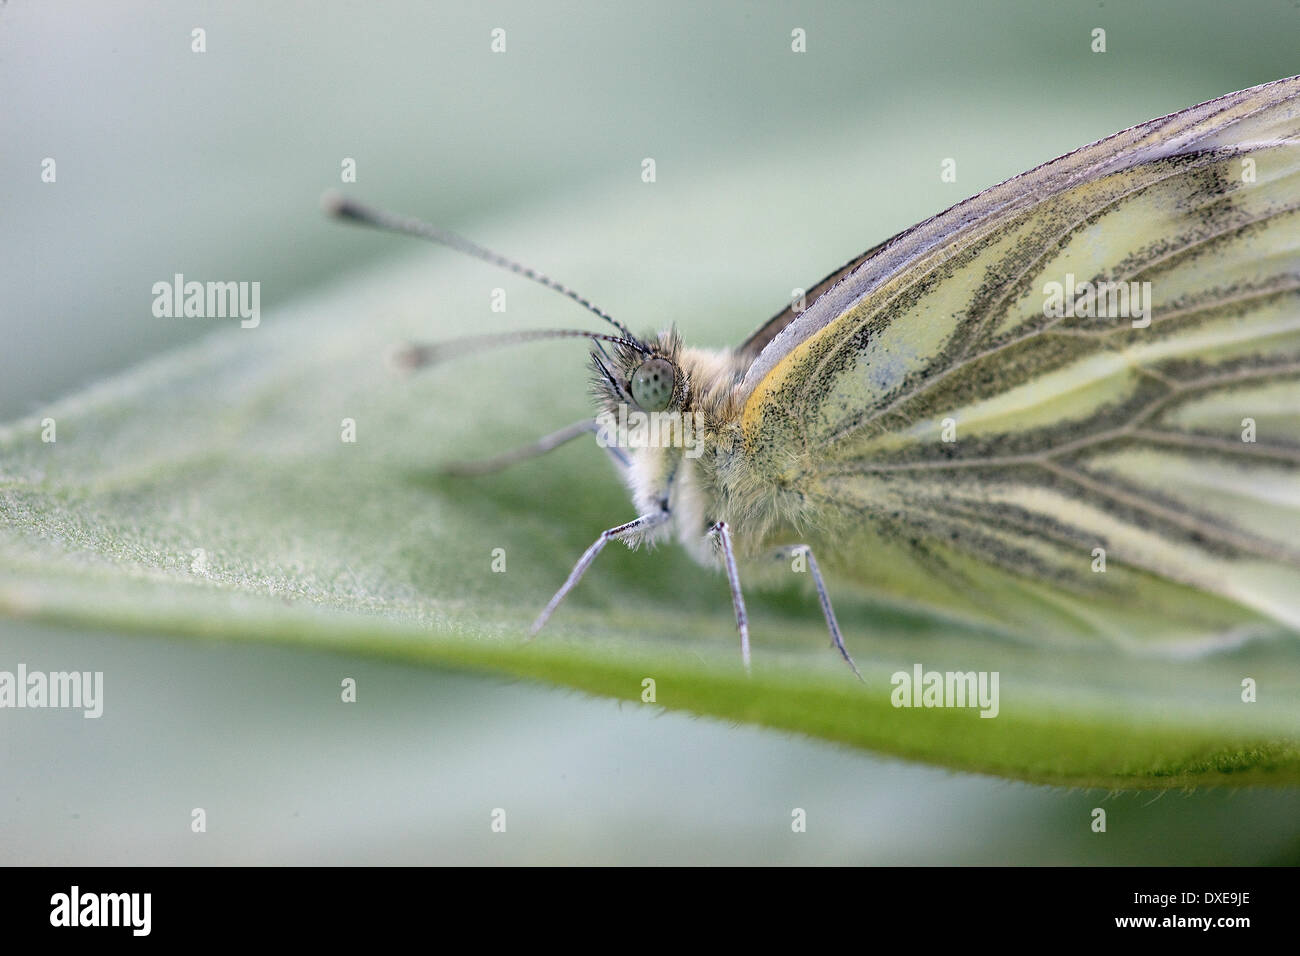 Green Veined White Butterfly Stock Photo